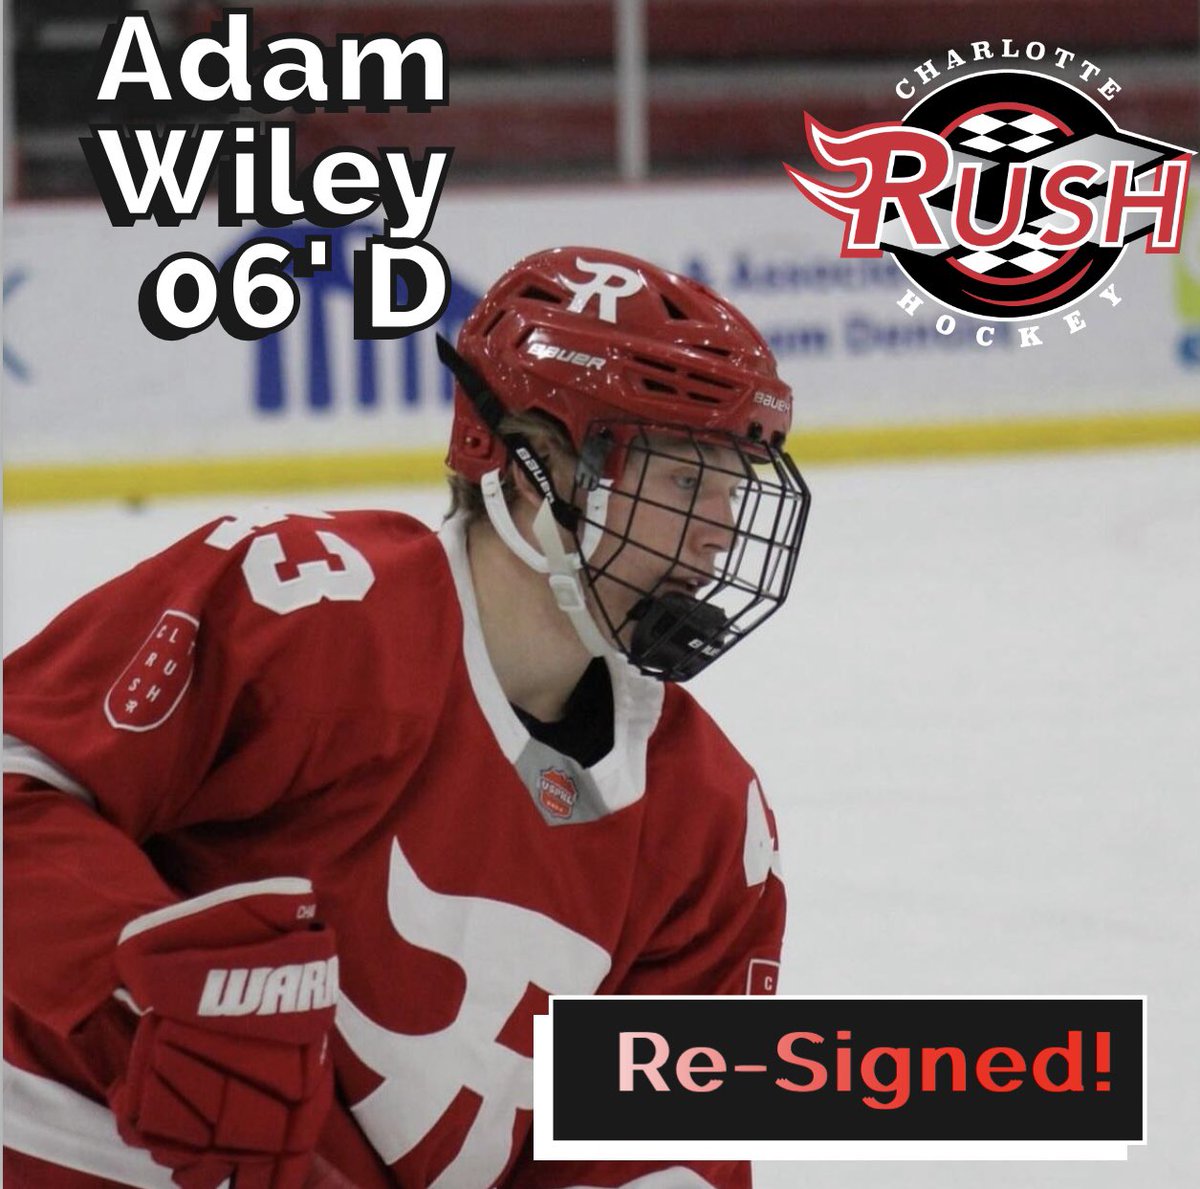 🚨RE-SIGNED!!🚨The Rush would like to welcome back 06' Defenseman Adam Wiley !! We are extremely excited to have him back for another season as we believe his ceiling is extremely high!! Welcome back Wiles!!! @The_DanKShow @USPHL #RushReload